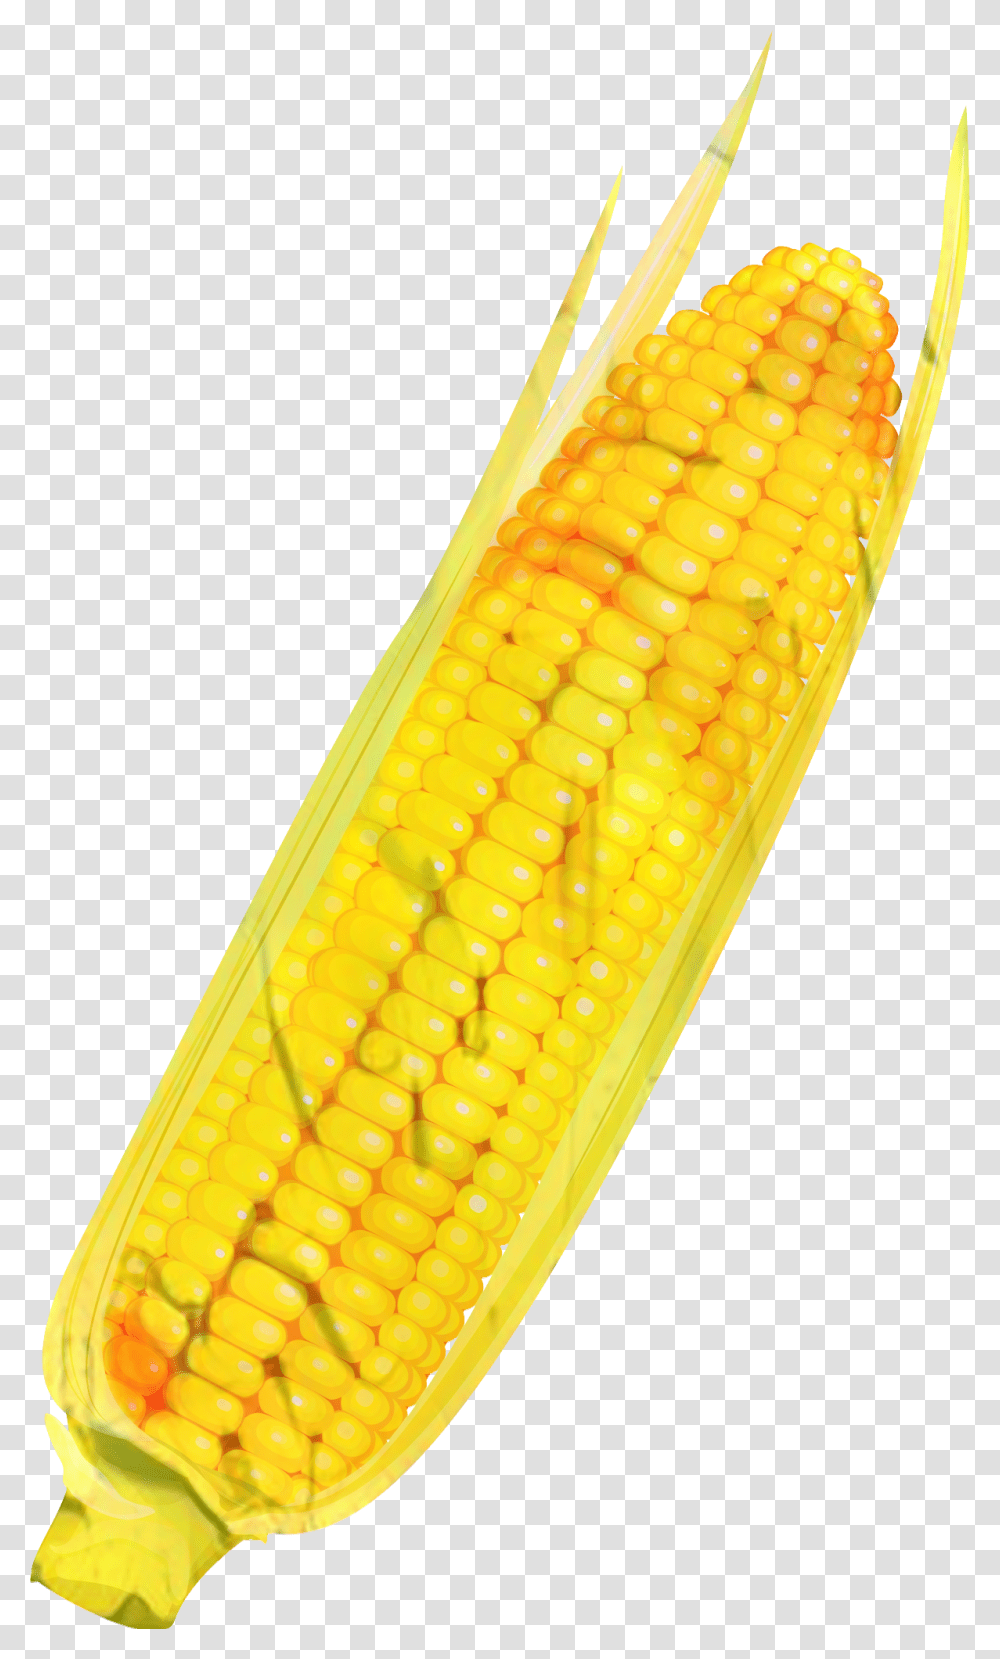 Corn On The Cob Commodity Corn On The Cob, Plant, Vegetable, Food, Grain Transparent Png